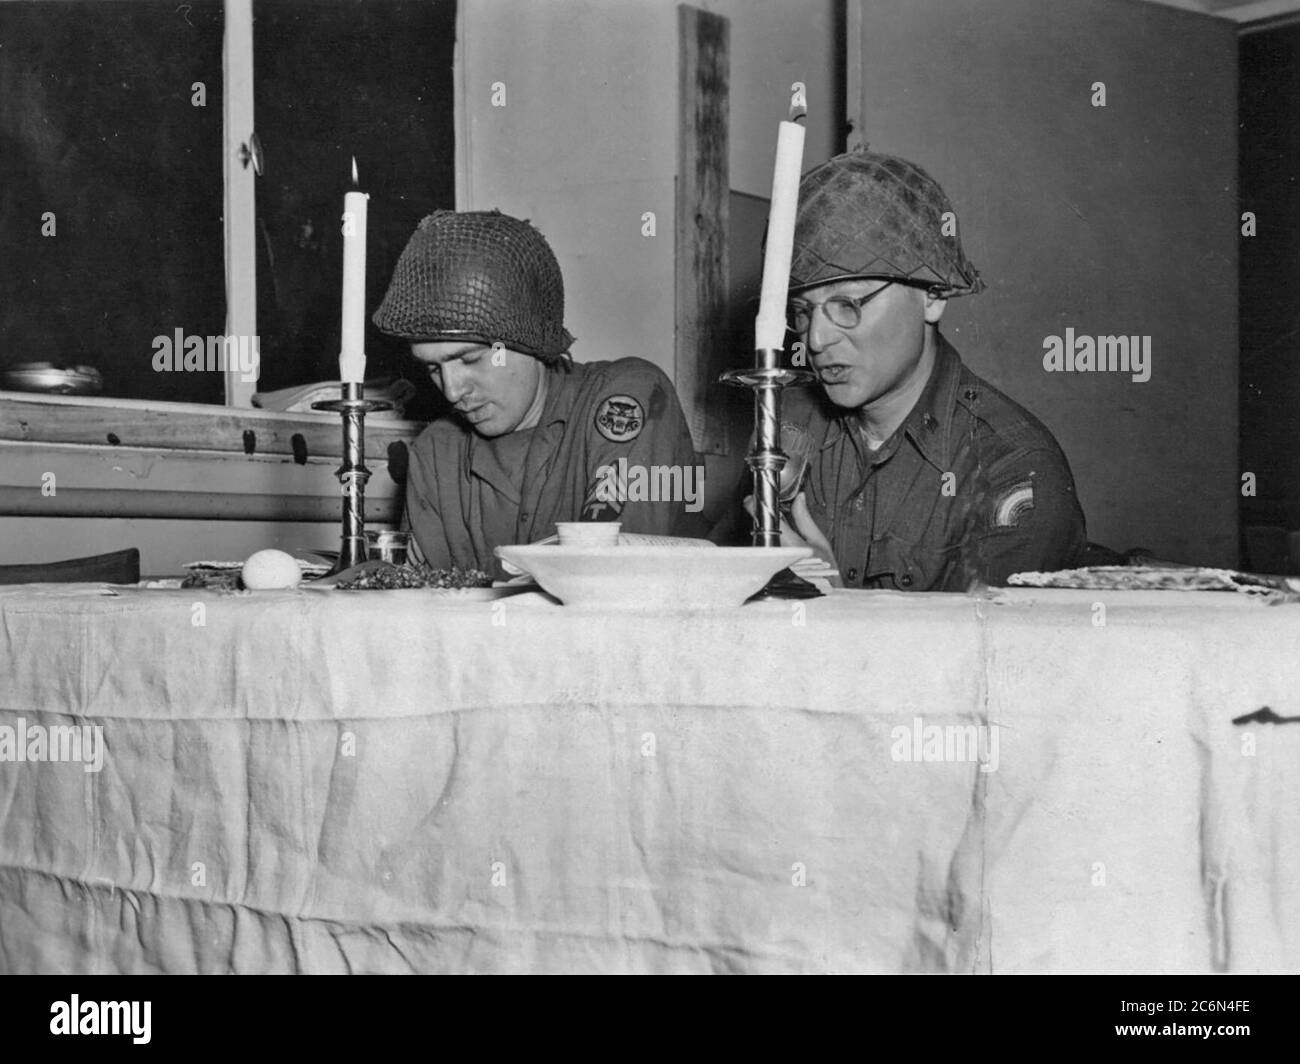 U.S. Army Chaplain (Maj.) Eli Bohnen, right, a rabbi serving with the 42nd Infantry Division in World War II, leads a seder service during the Jewish holiday of Passover in Dahn, Germany March 28, 1945, just over a month before the German surrender. Bohnen and his assistant Cpl. Eli Heimberg created a division Haggadah specifically for the Passover seder. The division Haggadah is believed to be the first Jewish ritual printing in Germany since the rise of the Nazis to power in 1933. U.S. National Guard image courtesy of the 42nd Infantry Division archives. Stock Photo